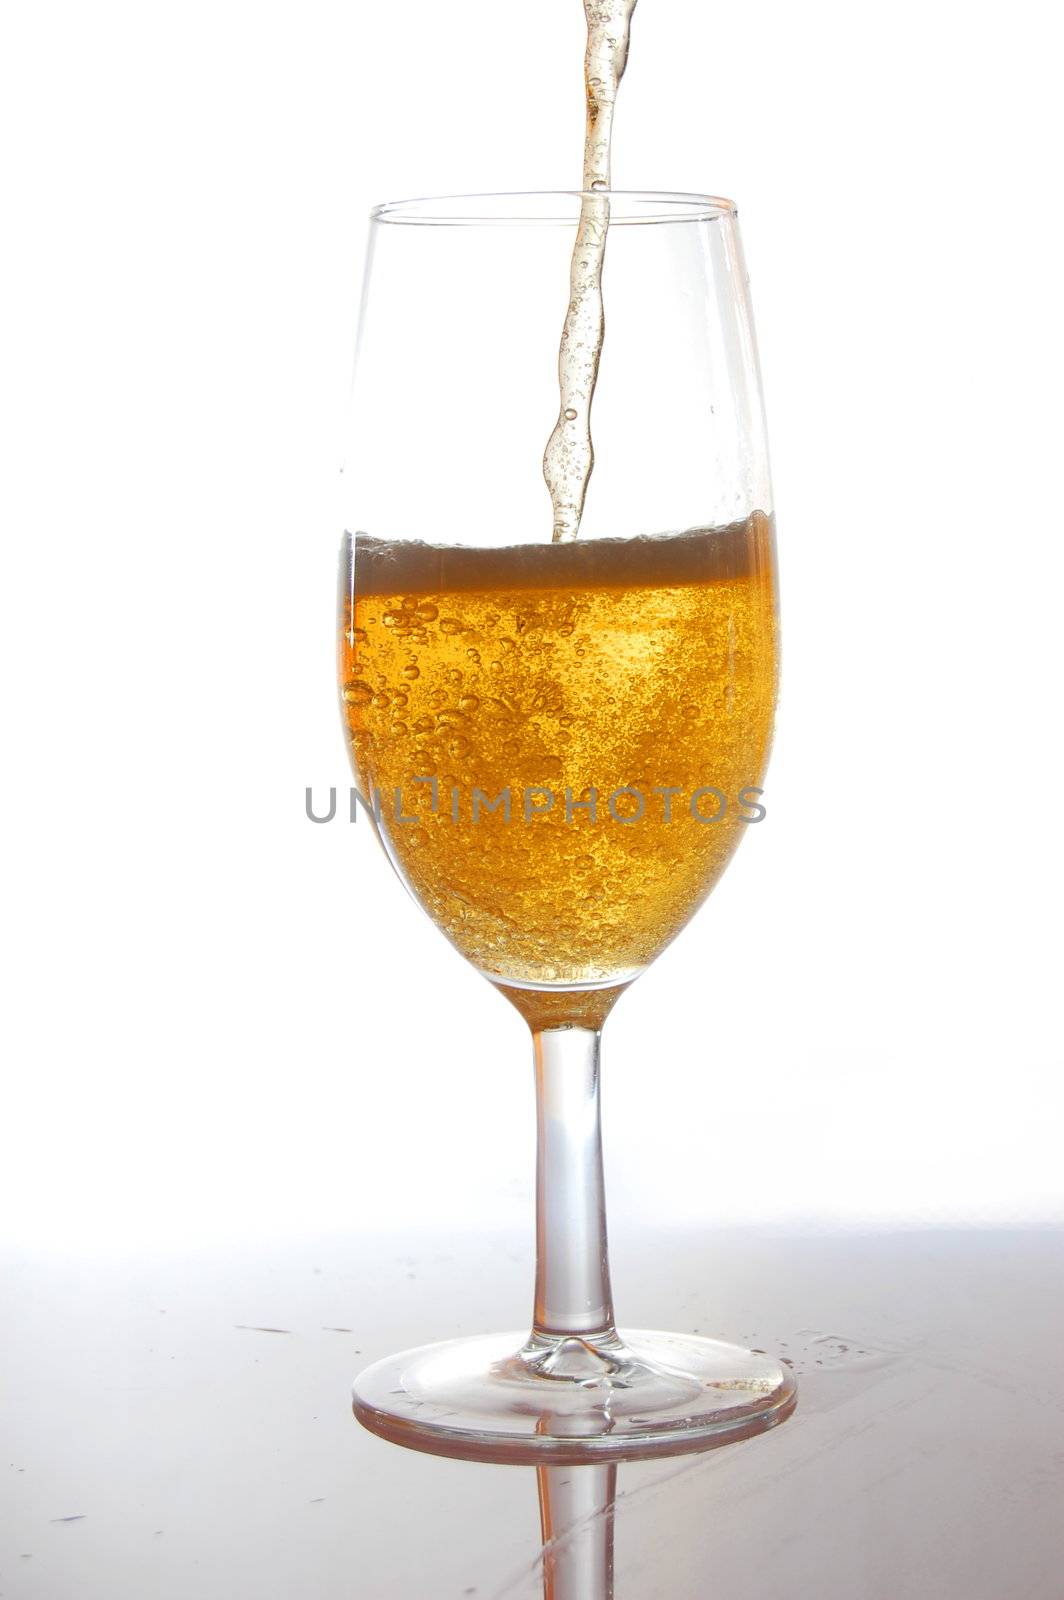 fresh and cold beer on white background